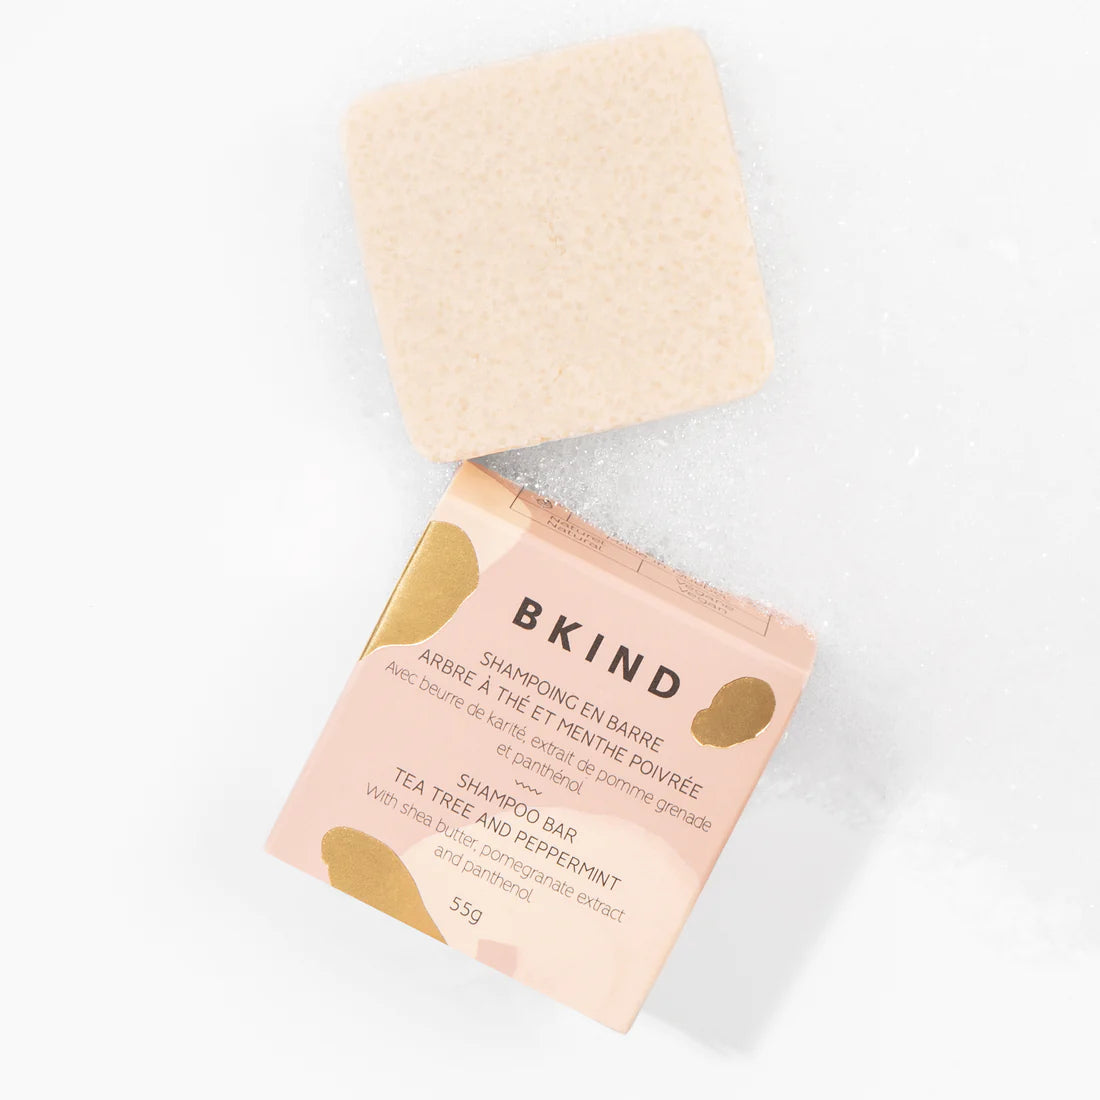 Shampoo bar - Colored and/or white hair